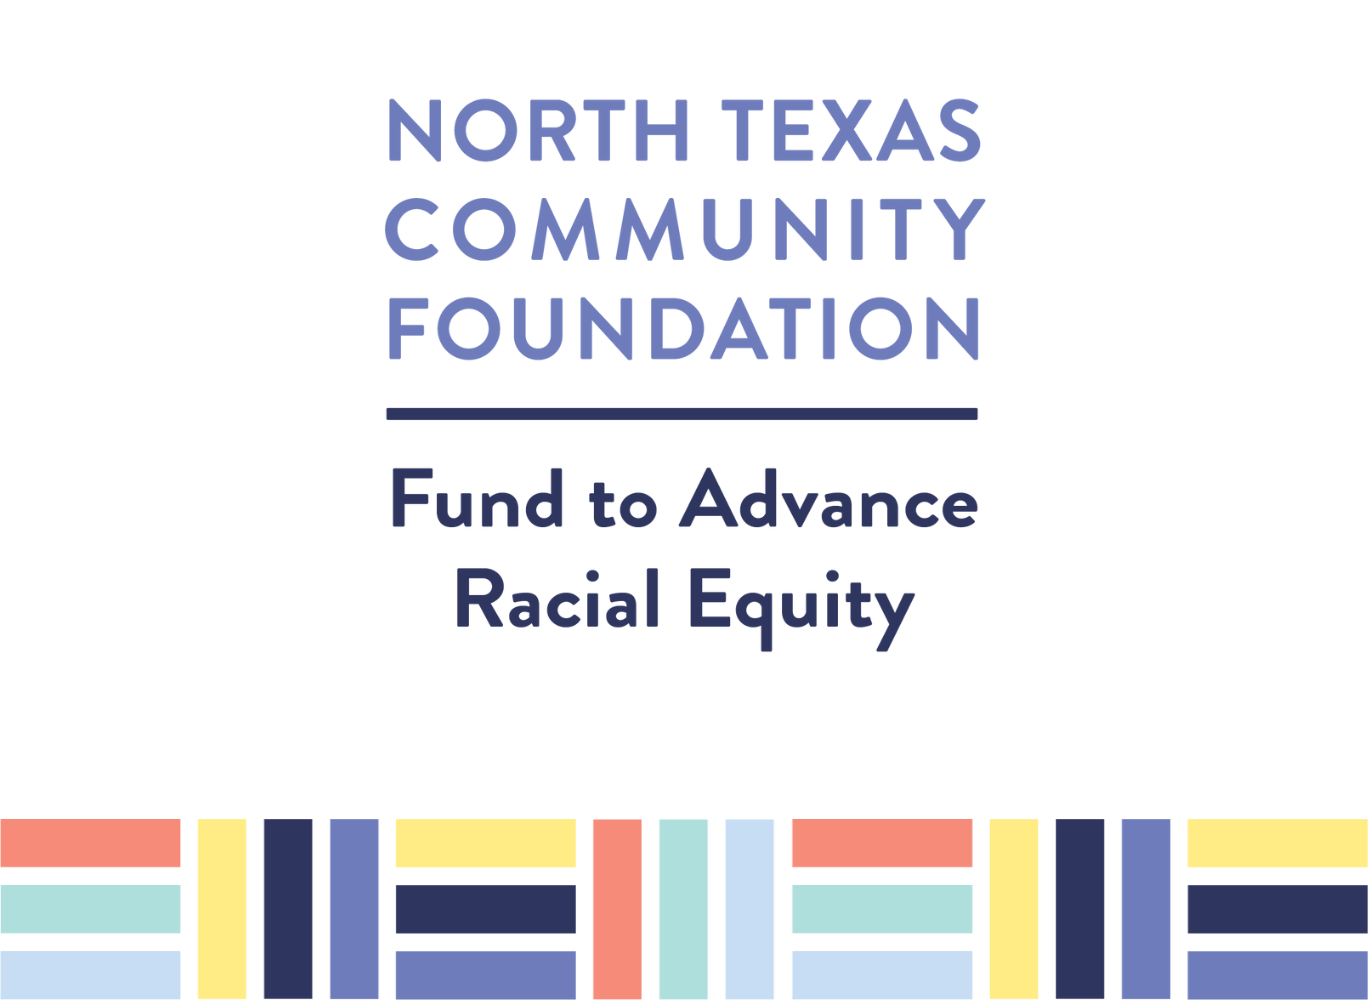 Photo with white background that states "North Texas Community Foundation Fund to Advance Racial Equity"